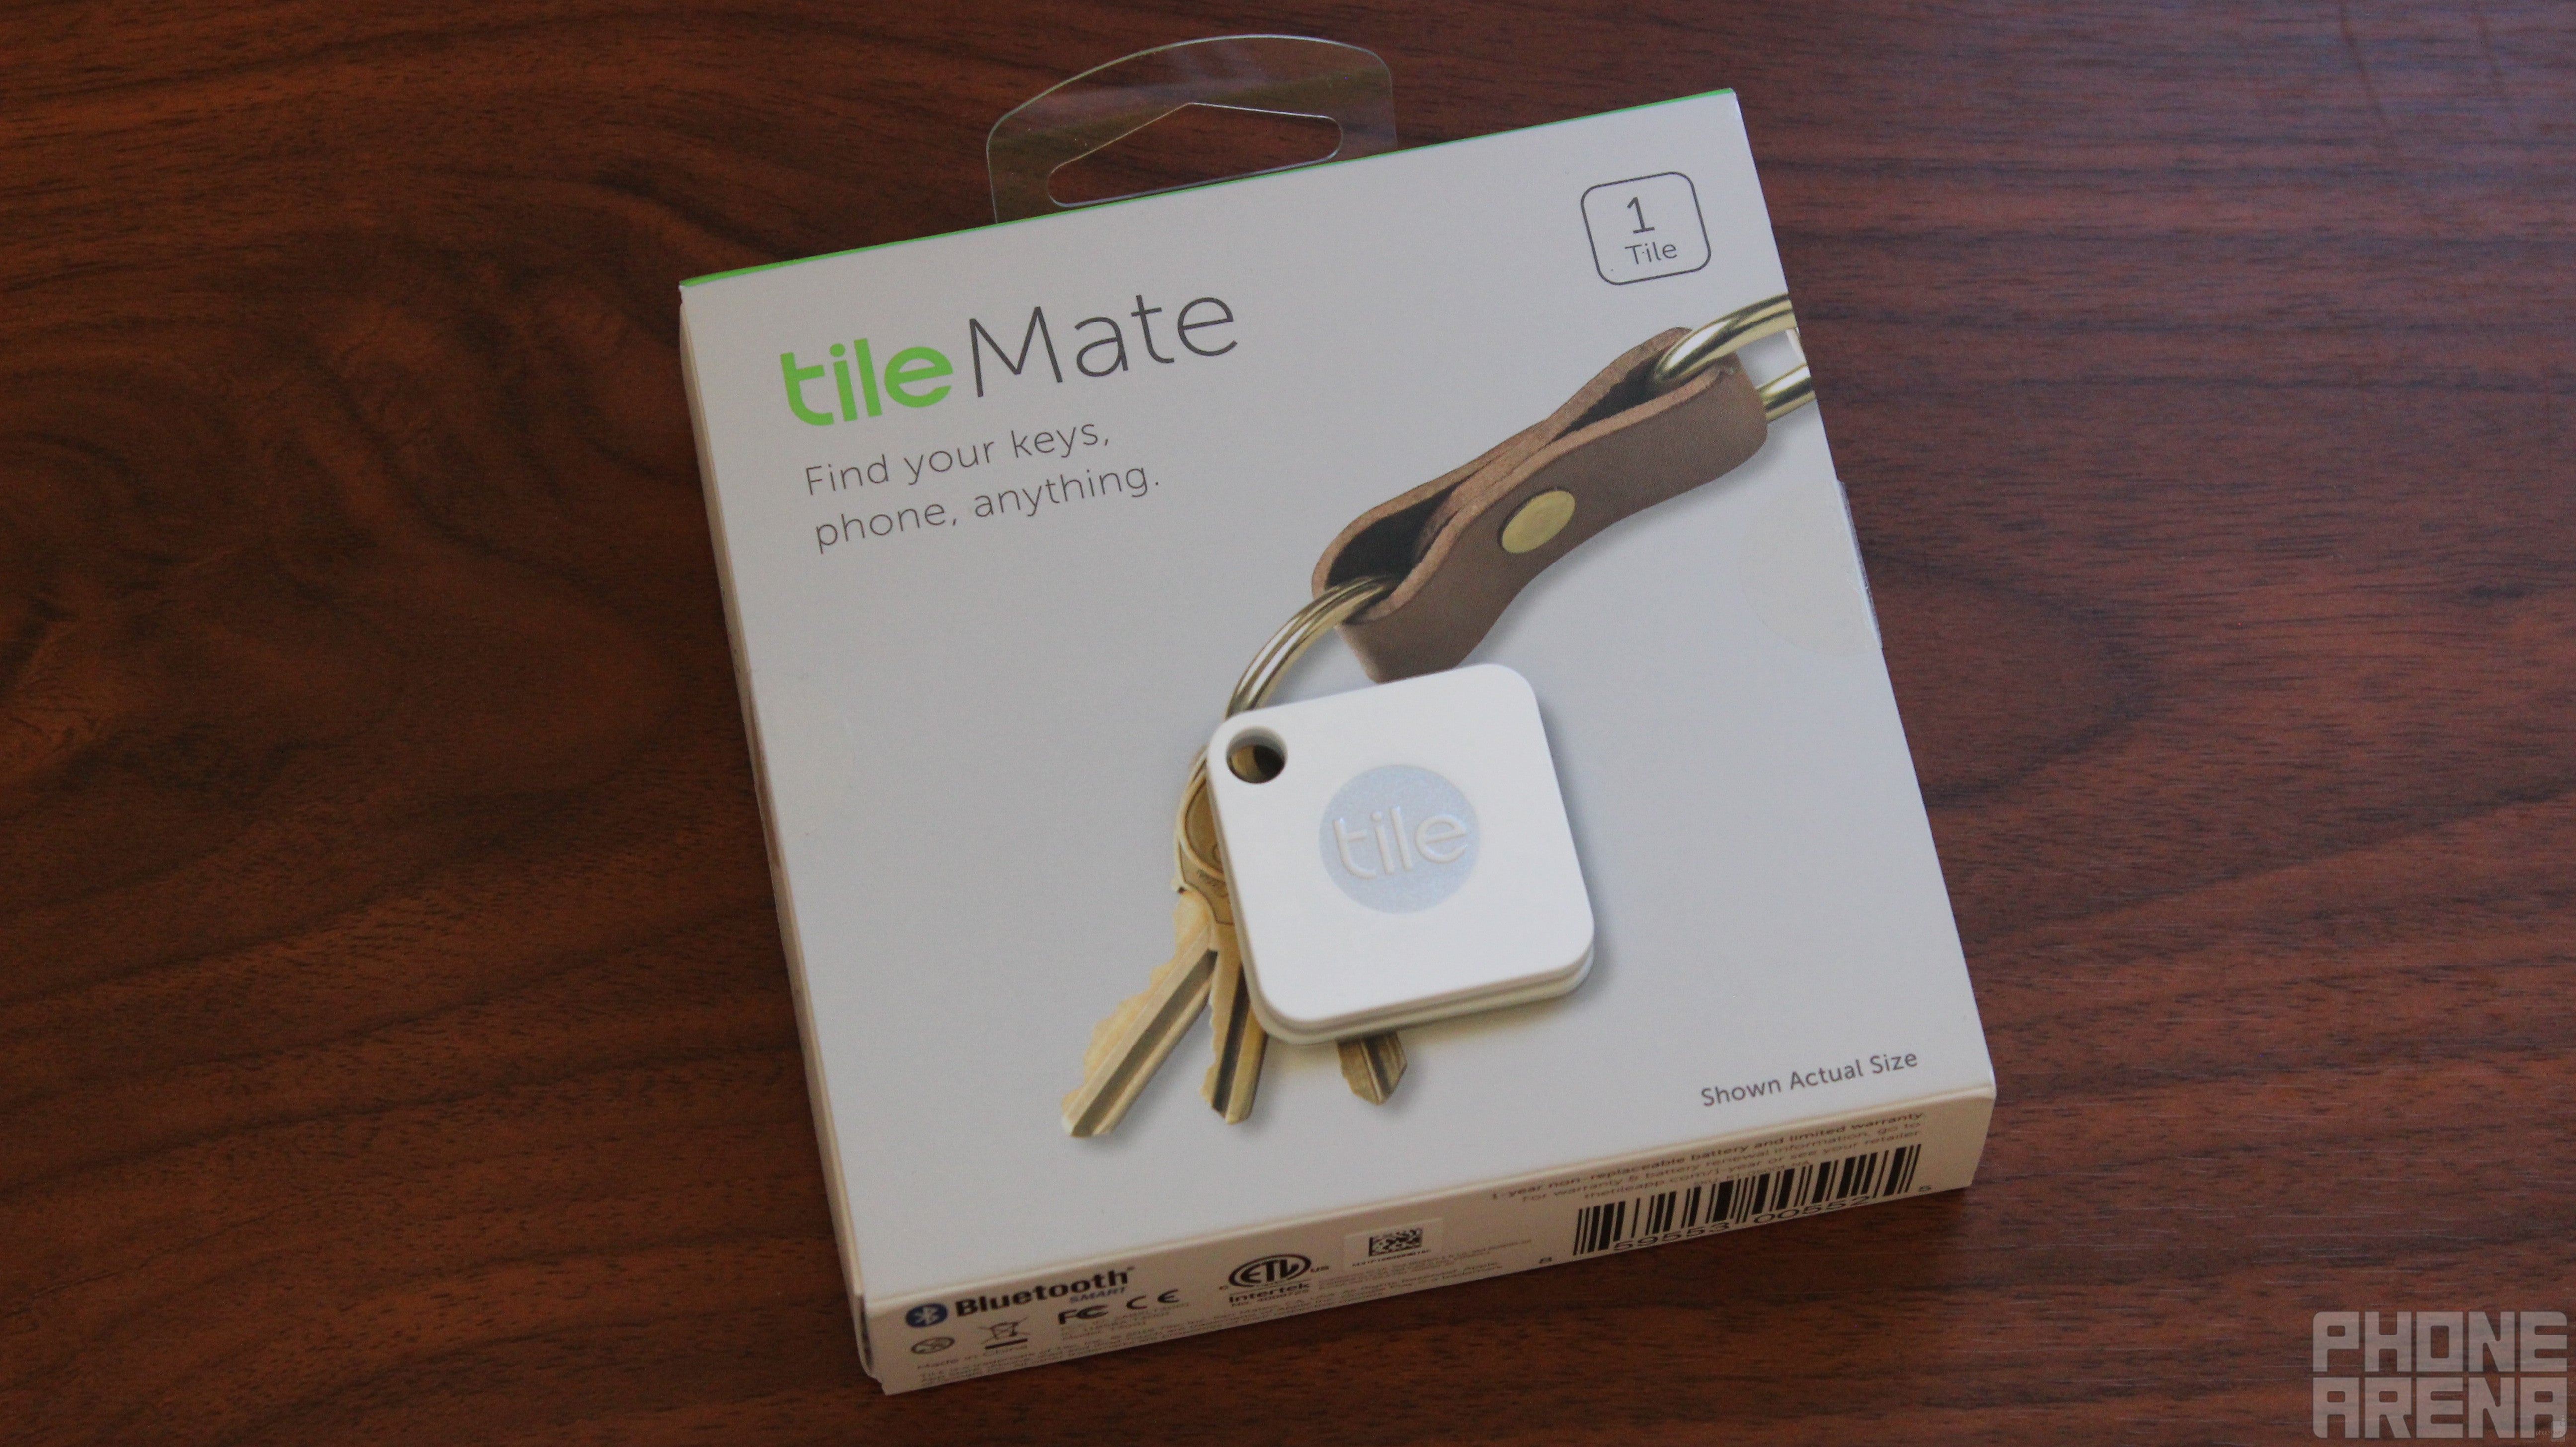 The new Tile Mate is a 25% smaller replacement to the original Tile